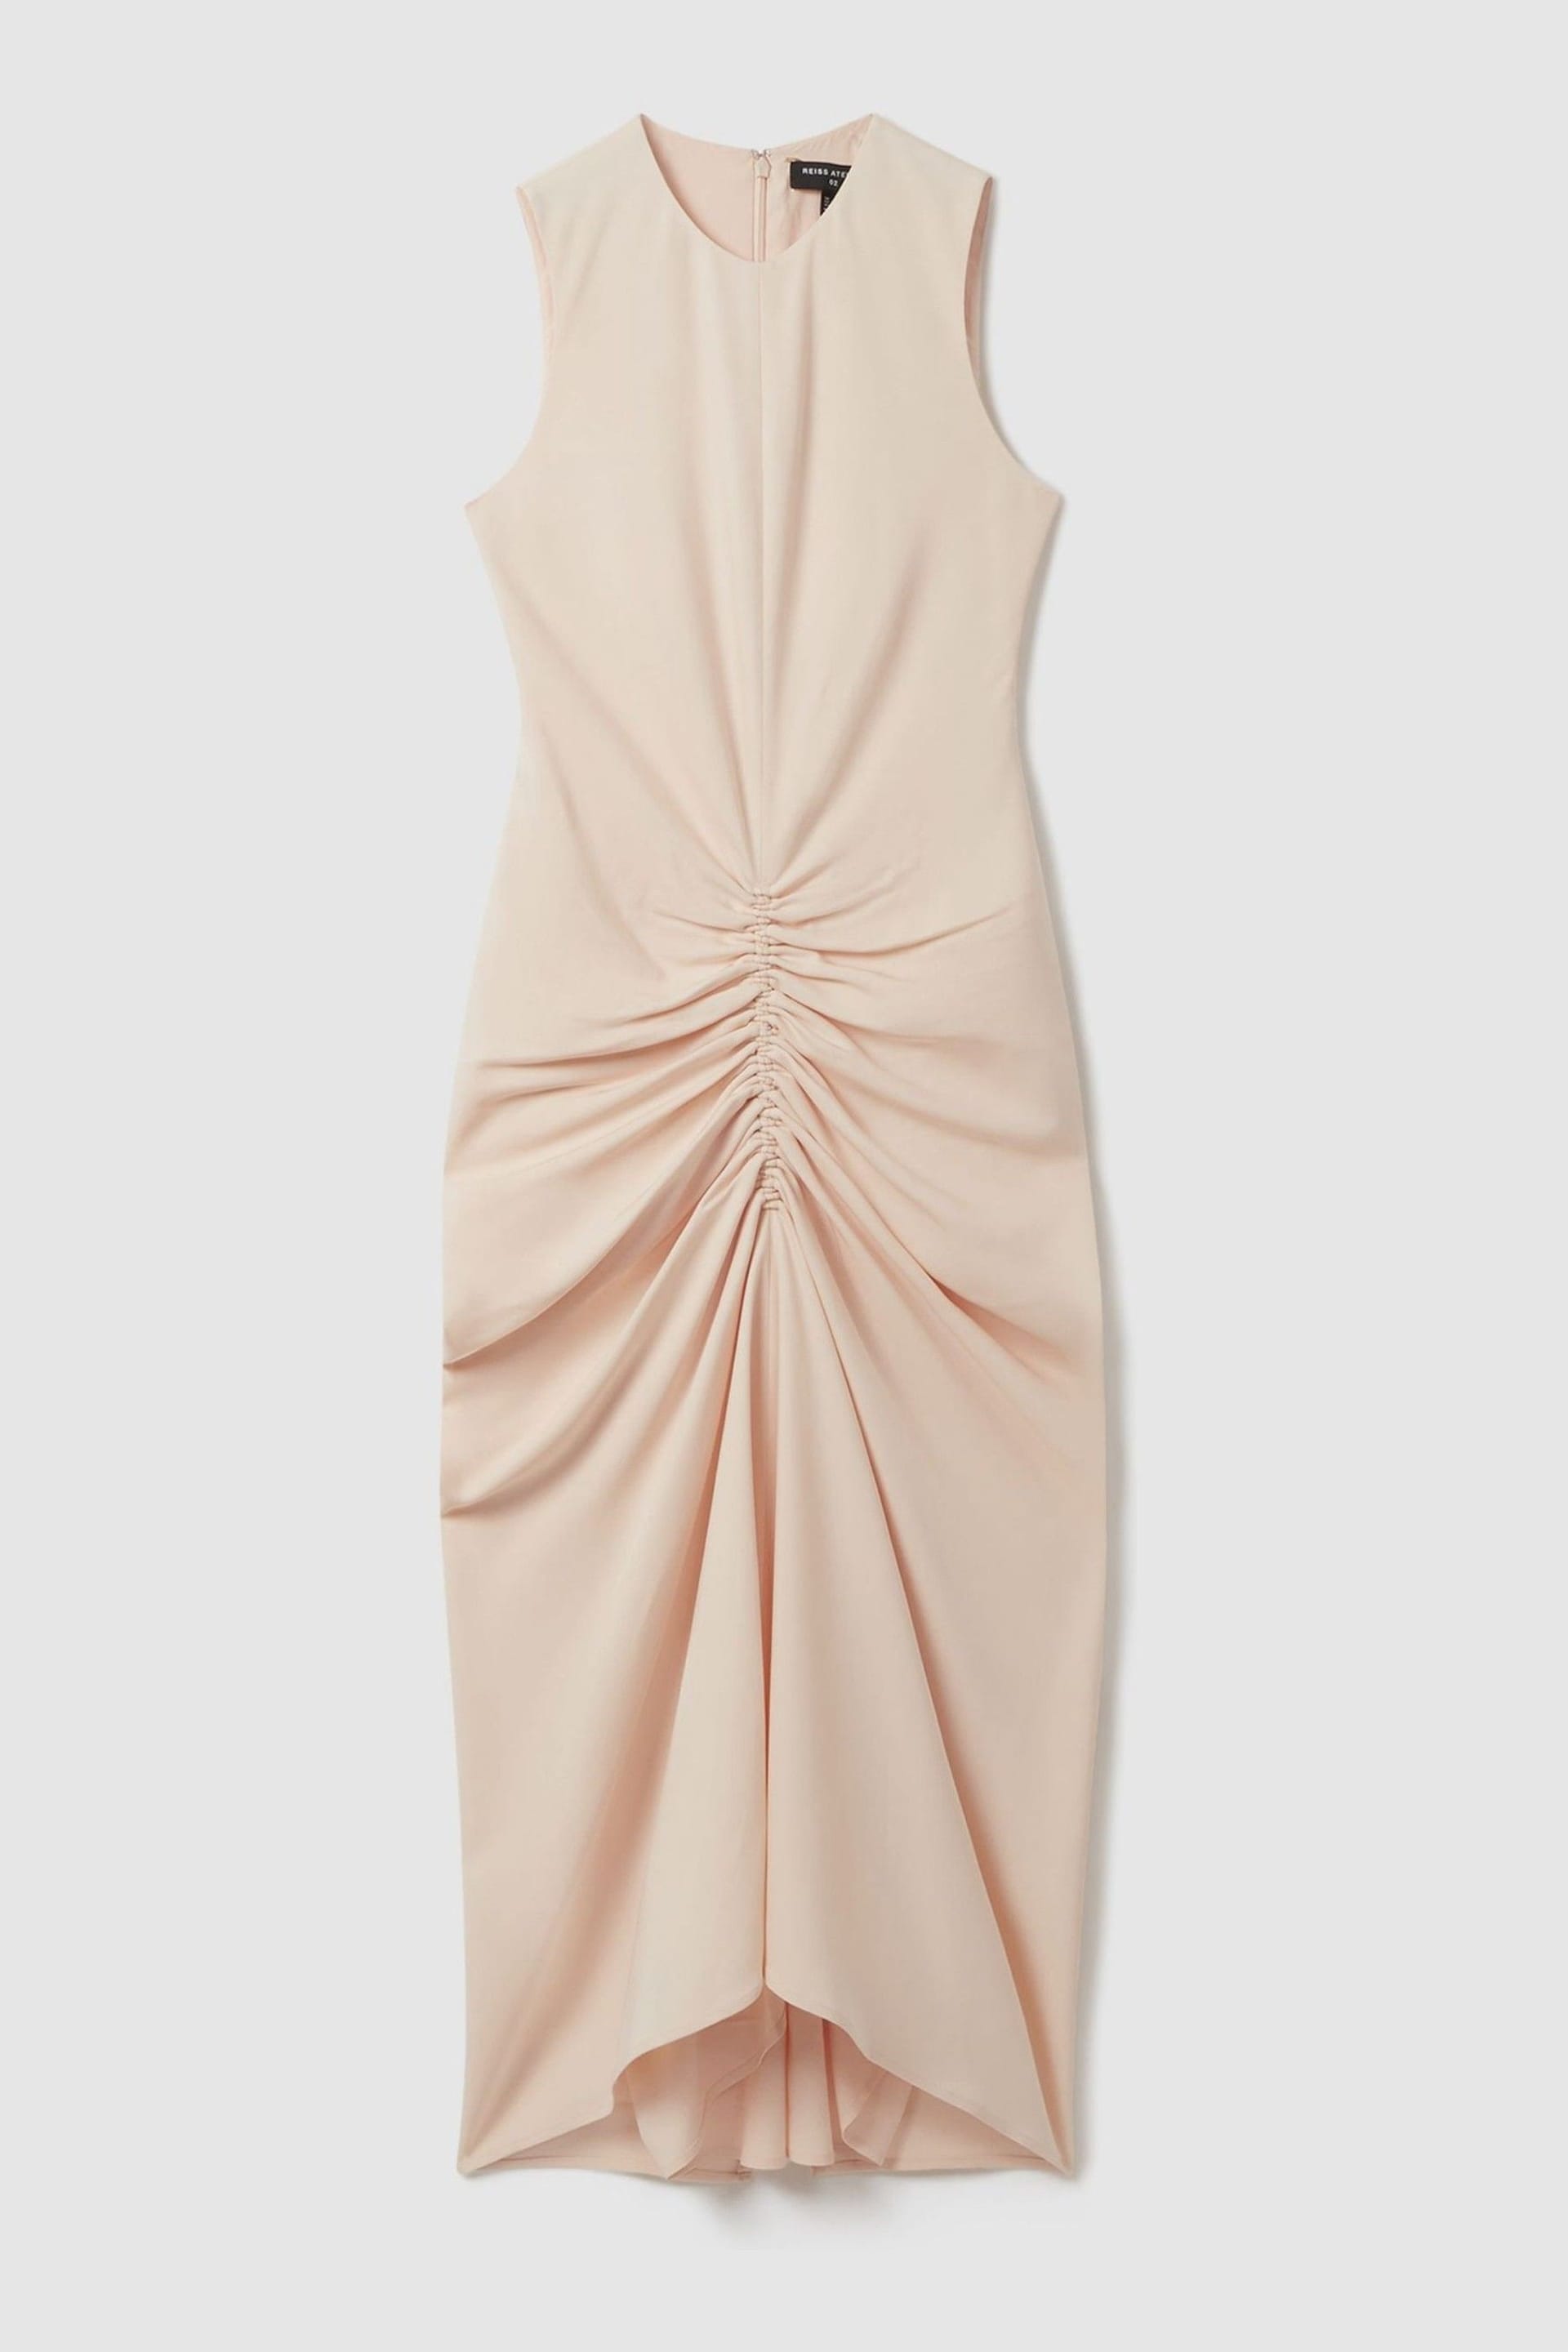 Reiss Blush Felicity Ruched Bodycon Midi Dress - Image 2 of 6